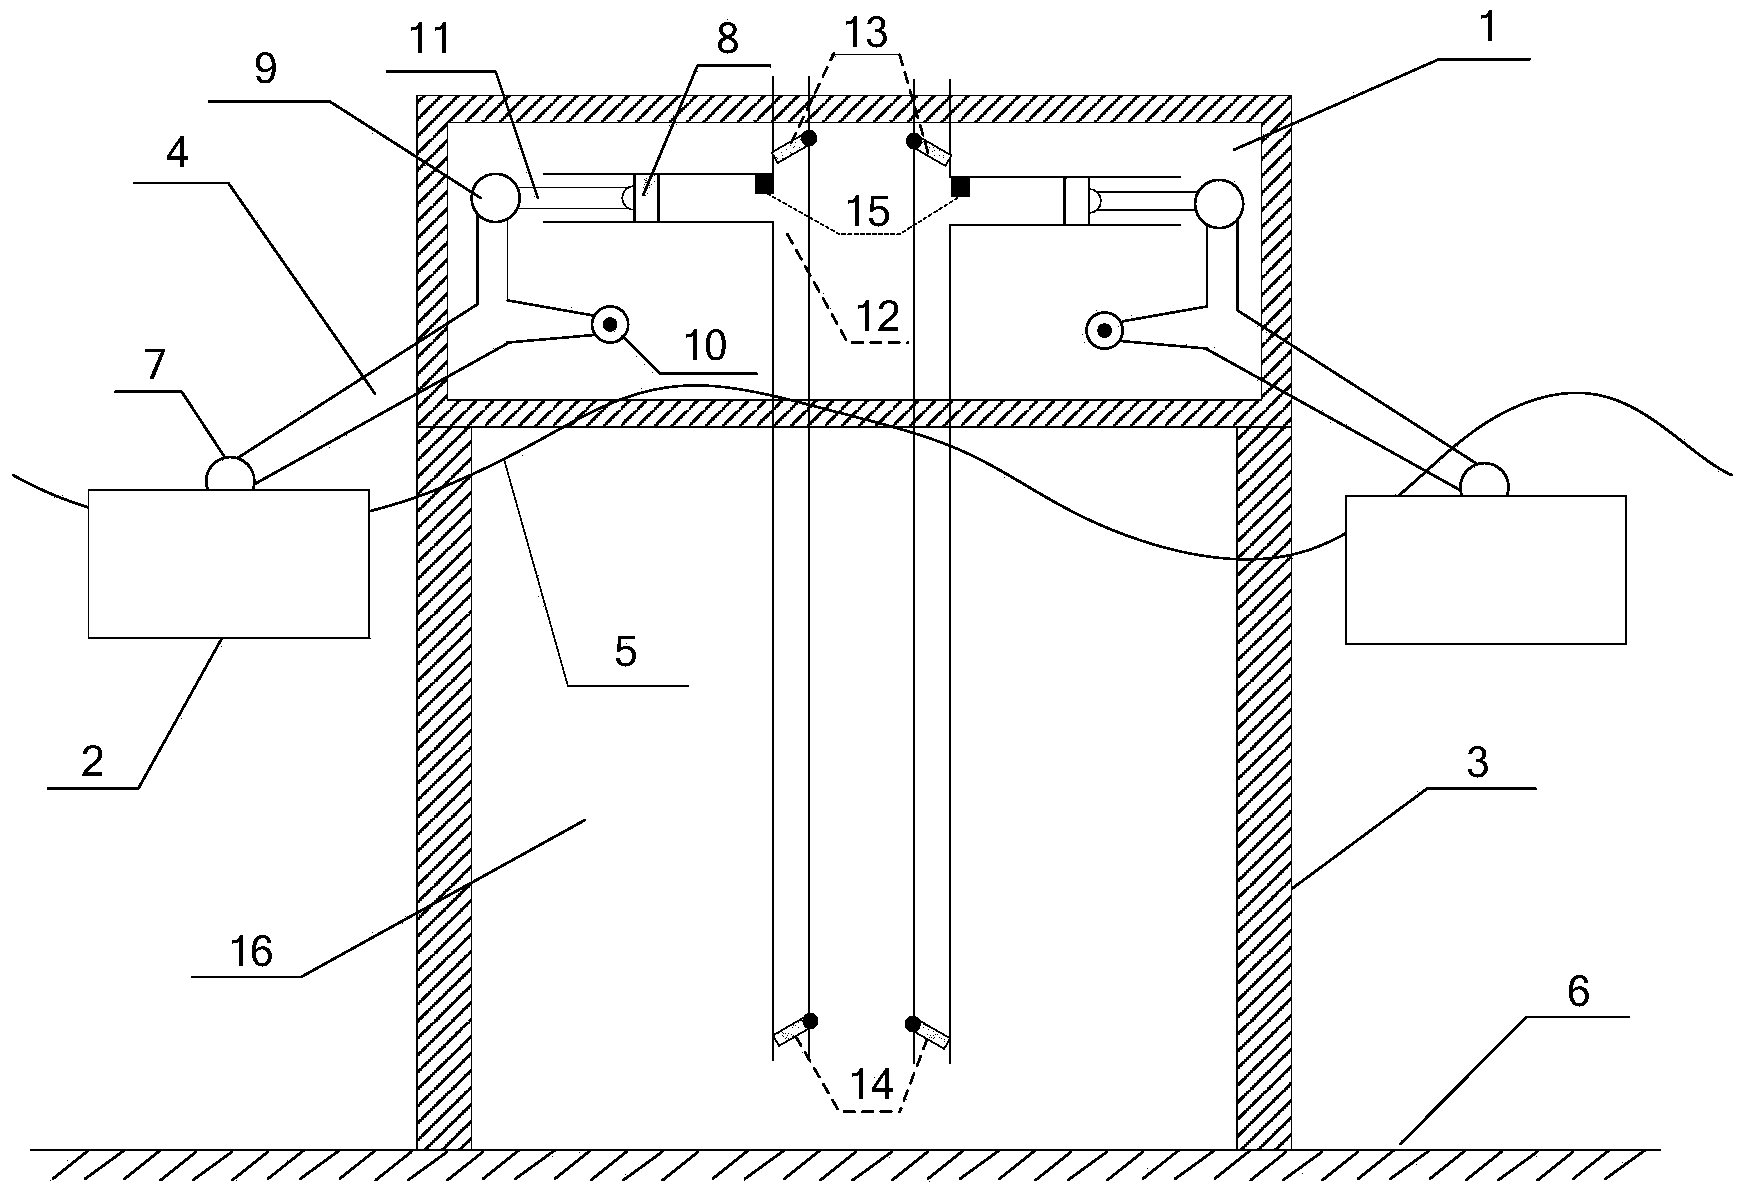 Wave energy oxygen supply device using multiple floaters